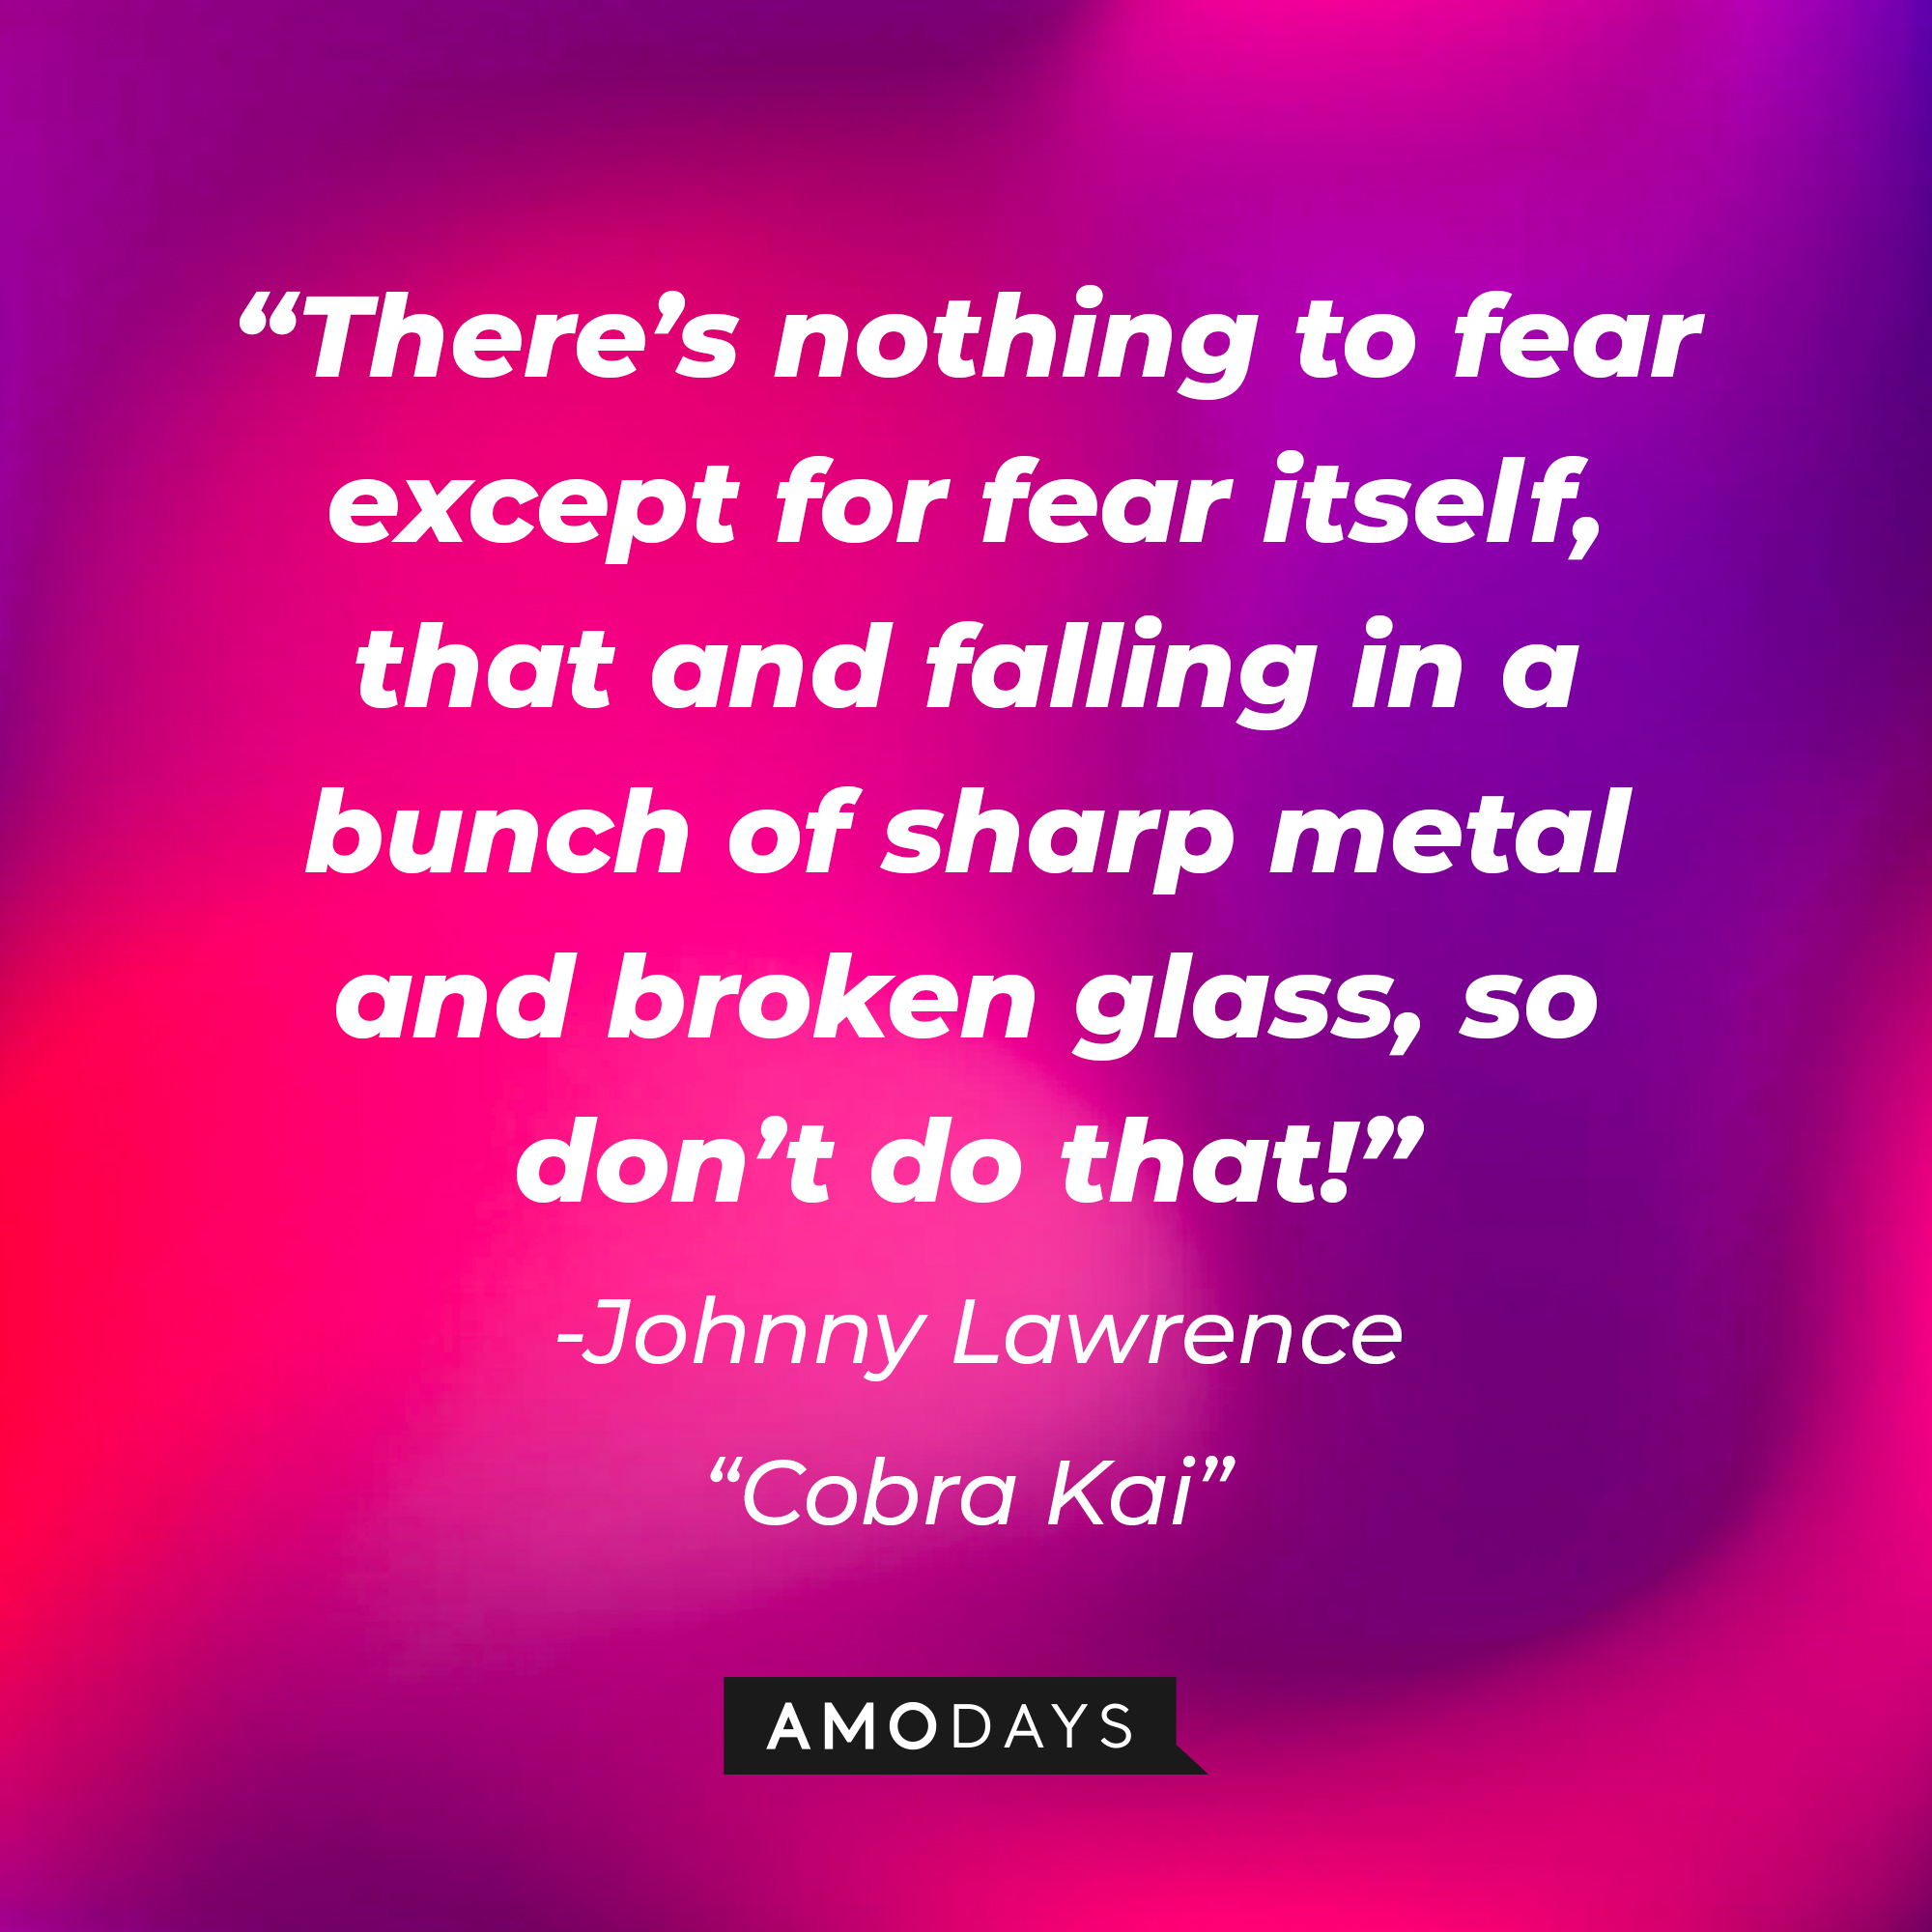 Johnny Lawrence's quote from "Cobra Kai:" “There’s nothing to fear except for fear itself, that and falling in a bunch of sharp metal and broken glass, so don’t do that!”  | Source: AmoDays